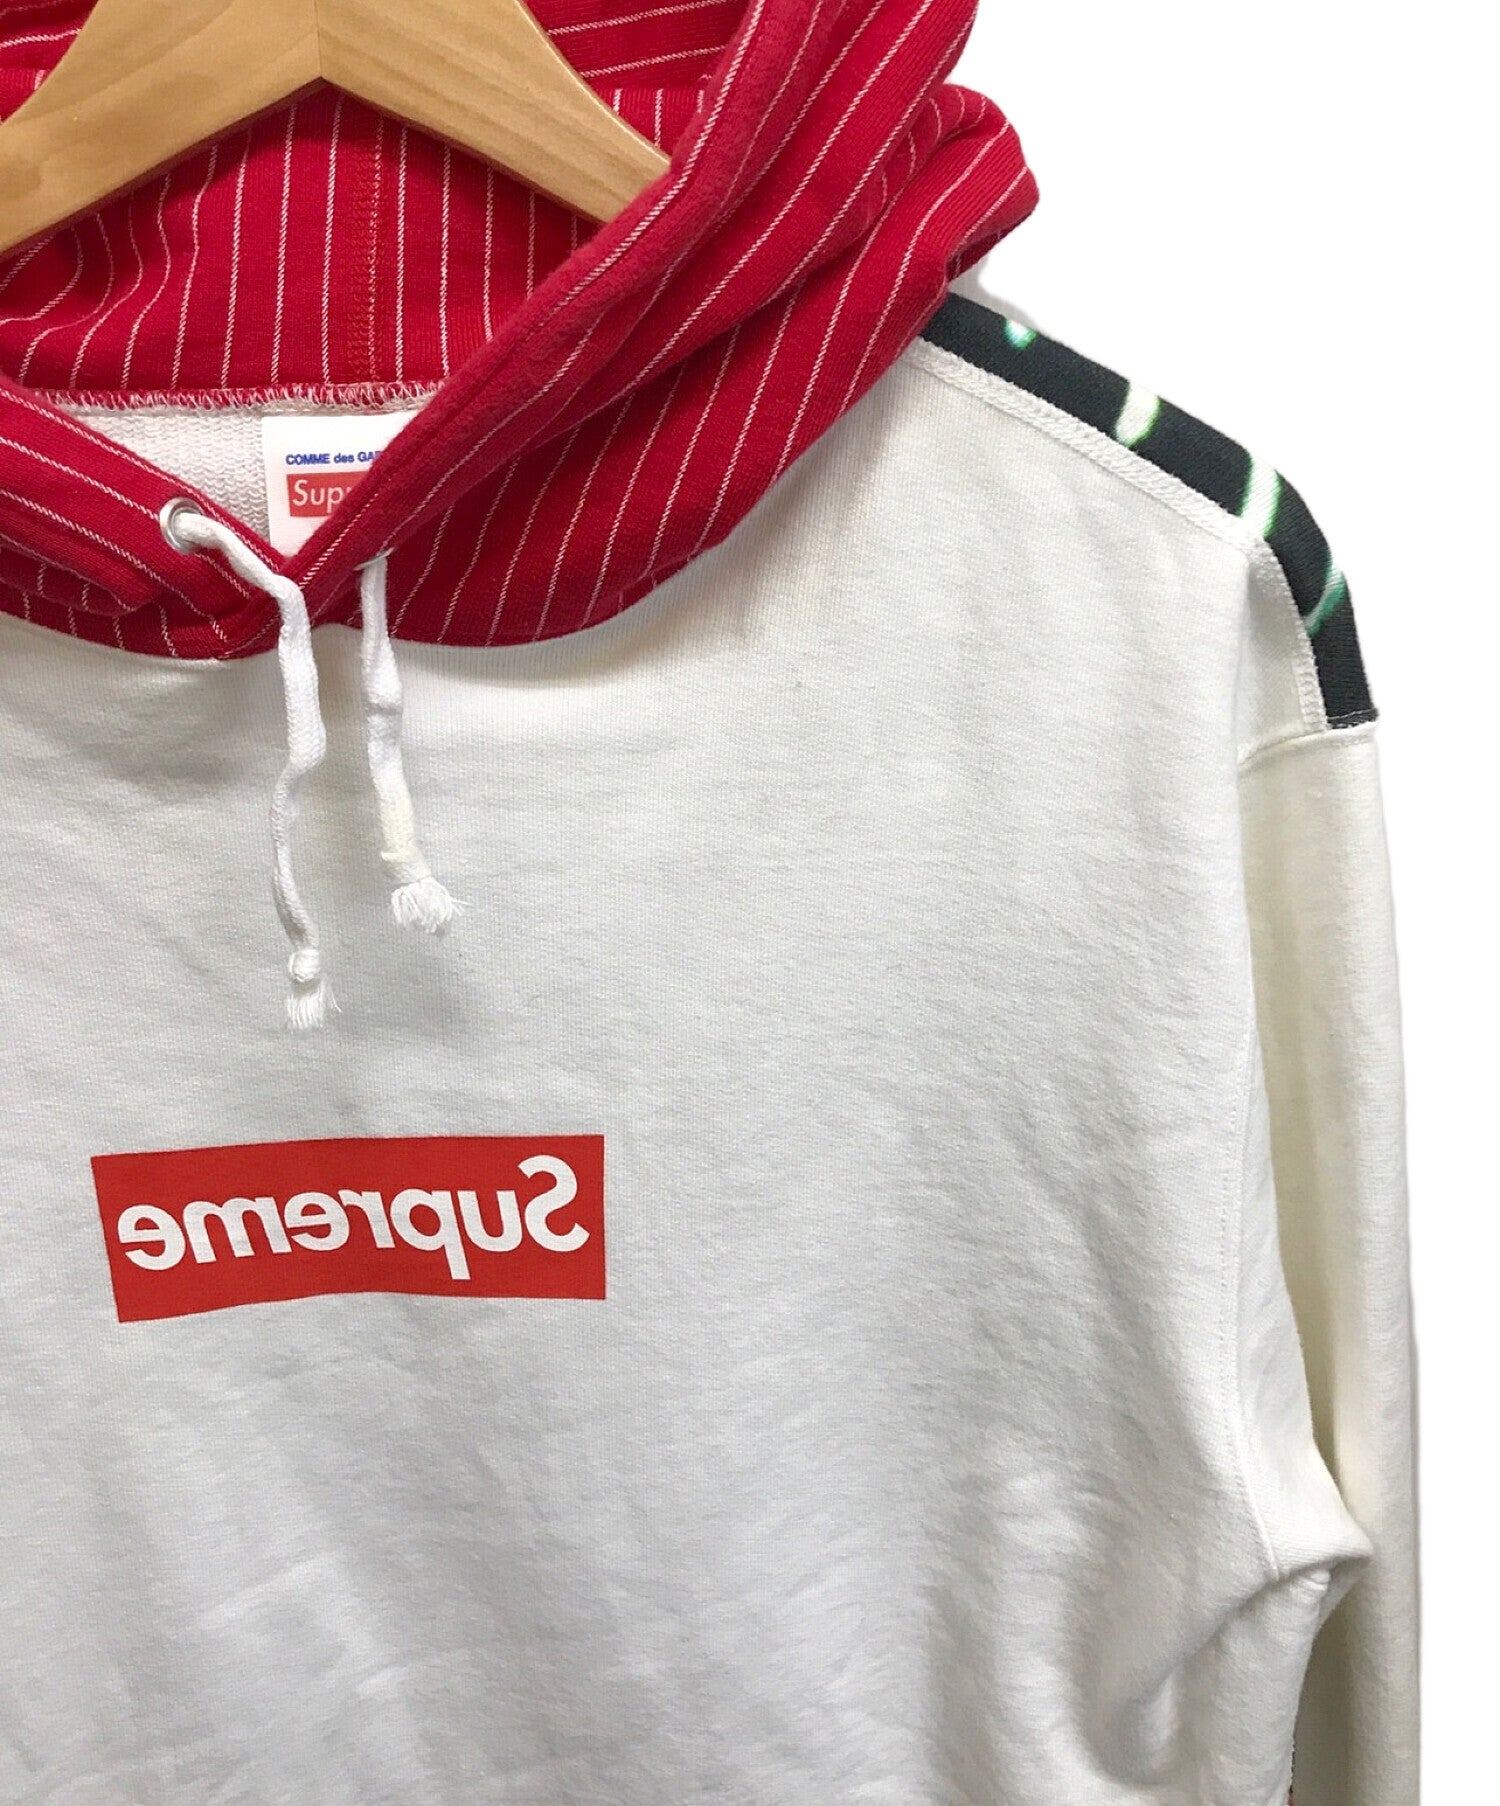 Fall/Winter 2021 Supreme Box Logo Hoodie: Where to Buy & Prices